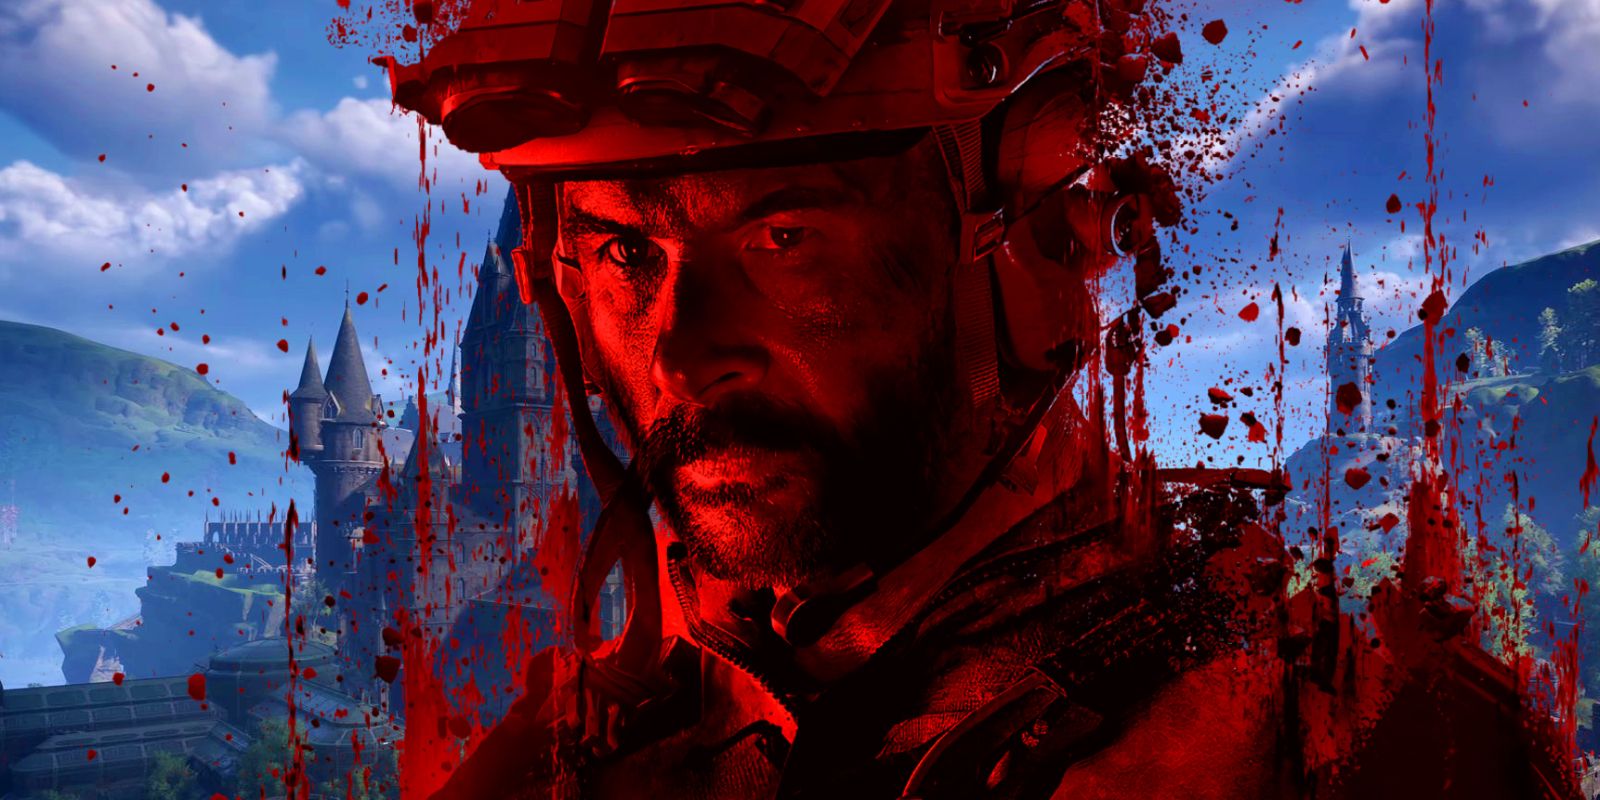 Captain Price, a soldier from Call of Duty: Modern Warfare 3, bathed in red light, obscuring a screenshot of the castle in Hogwarts Legacy. All around Price are red spot that look like blood, some trailing up the image.